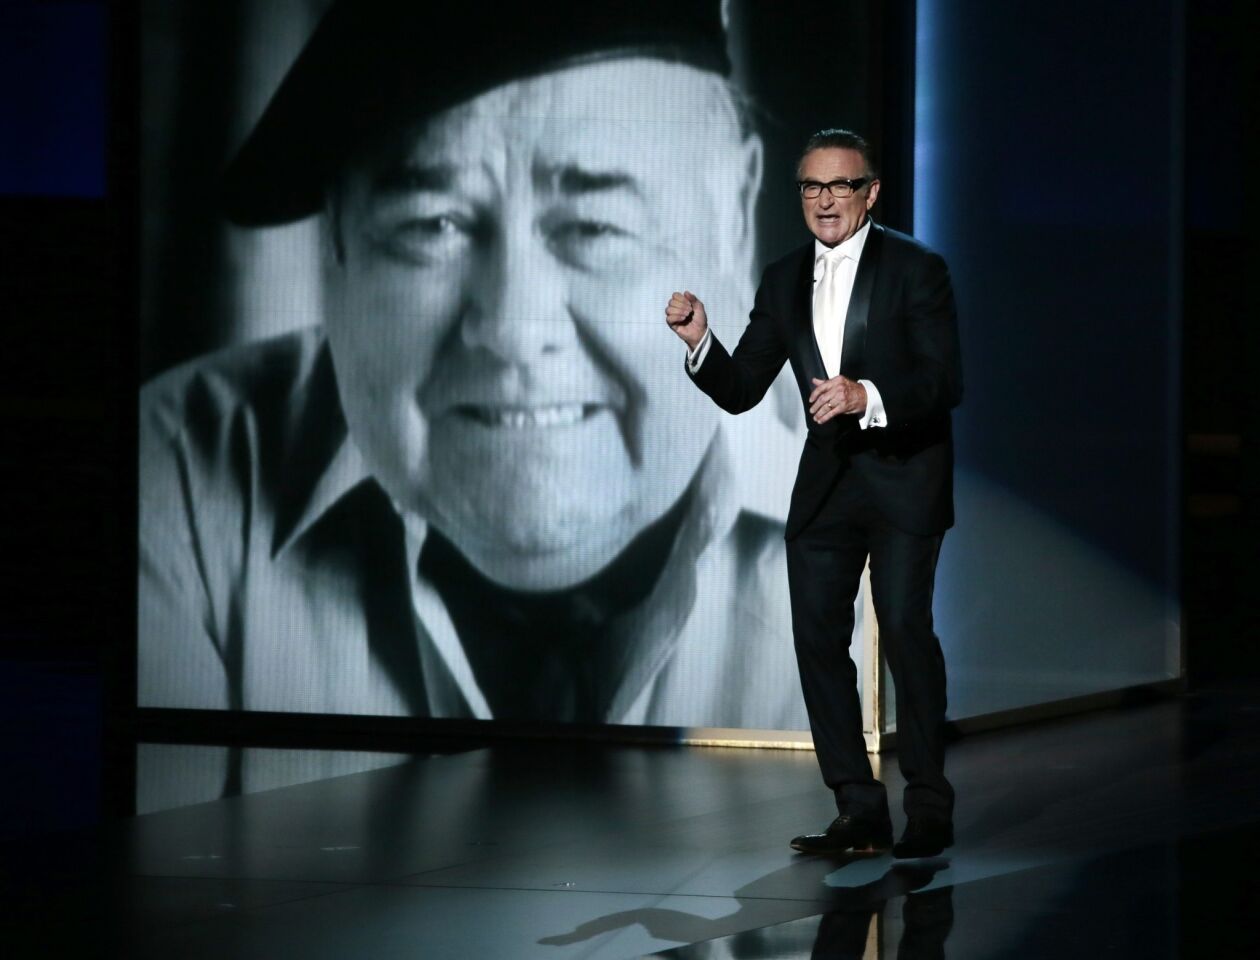 The Emmys are a celebration of TV, which is nice because most everything on TV is archived in some capacity. So it was an odd choice to not air a single moment of footage of the late Jonathan Winters during his tribute. Instead, Robin Williams spoke eloquently about the man and even performed a bit of one of his most famous routines. It's nice that Williams has such clear memories of Winters, the rest of us will have to make due with Williams' Winters impression. Or Rob Reiner's best Archie Bunker.